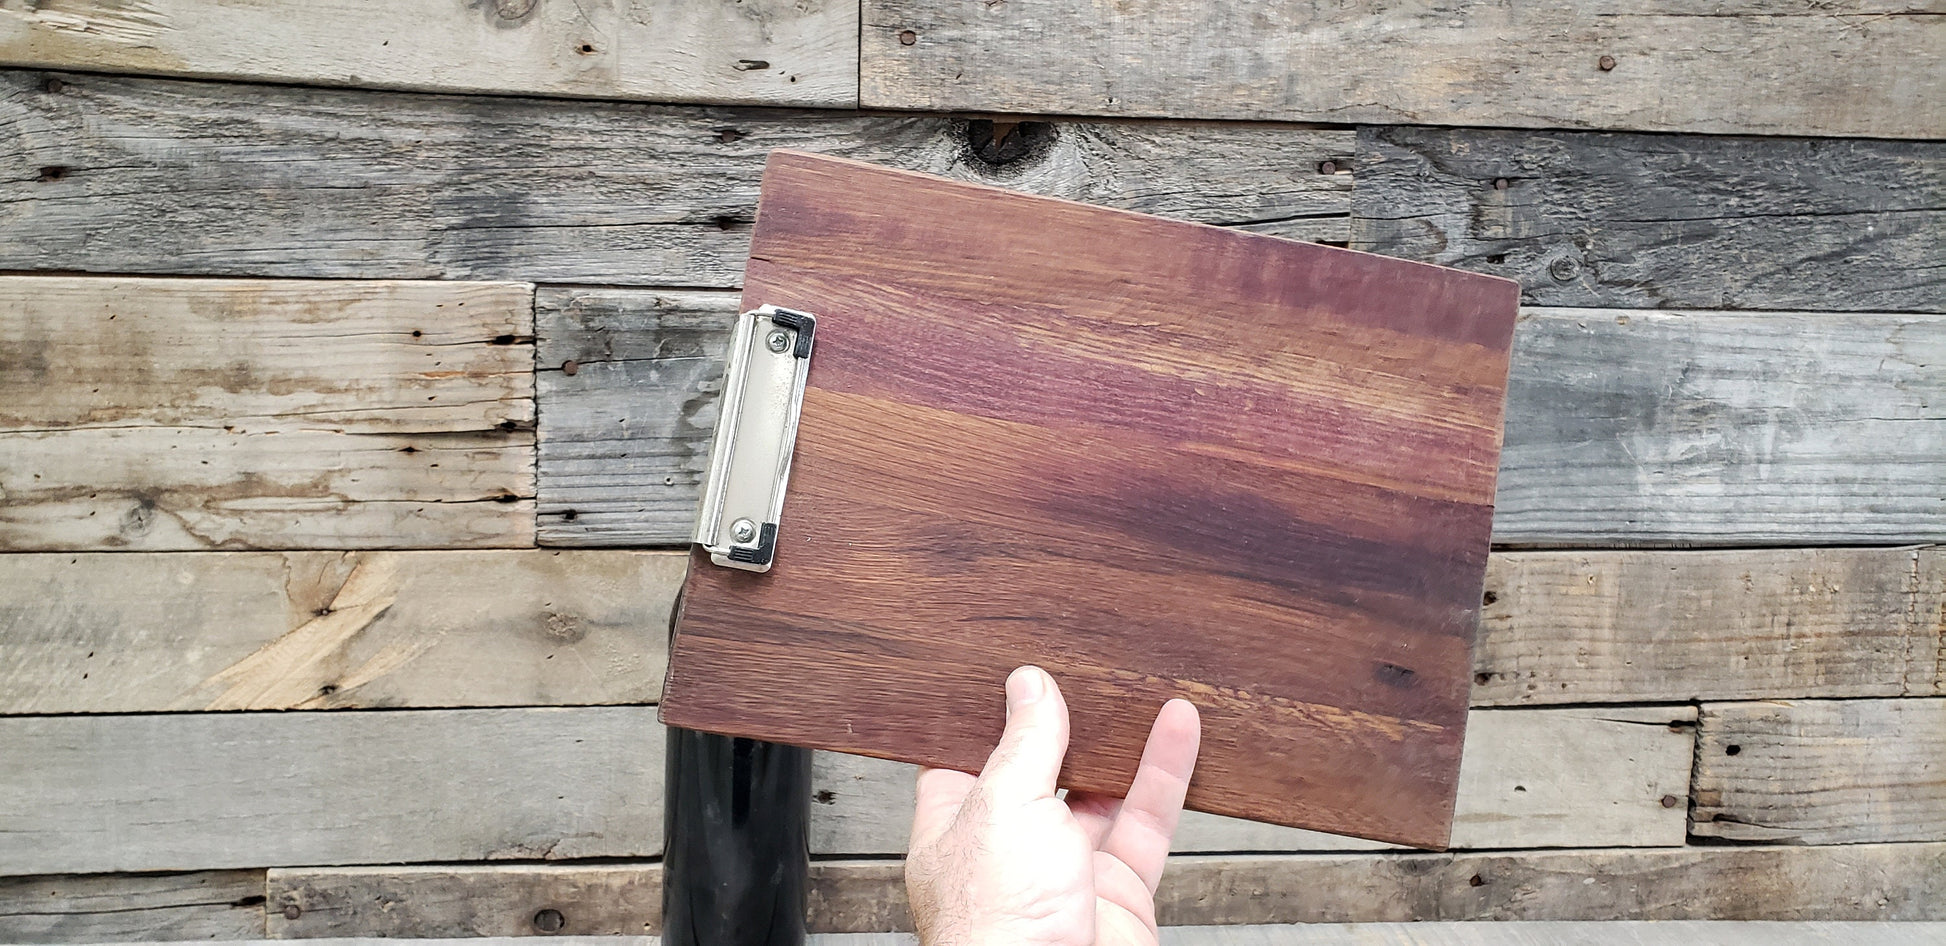 SALE Wine Barrel Clip Board 0002 Made from reclaimed CA wine barrels - 100% Recycled!